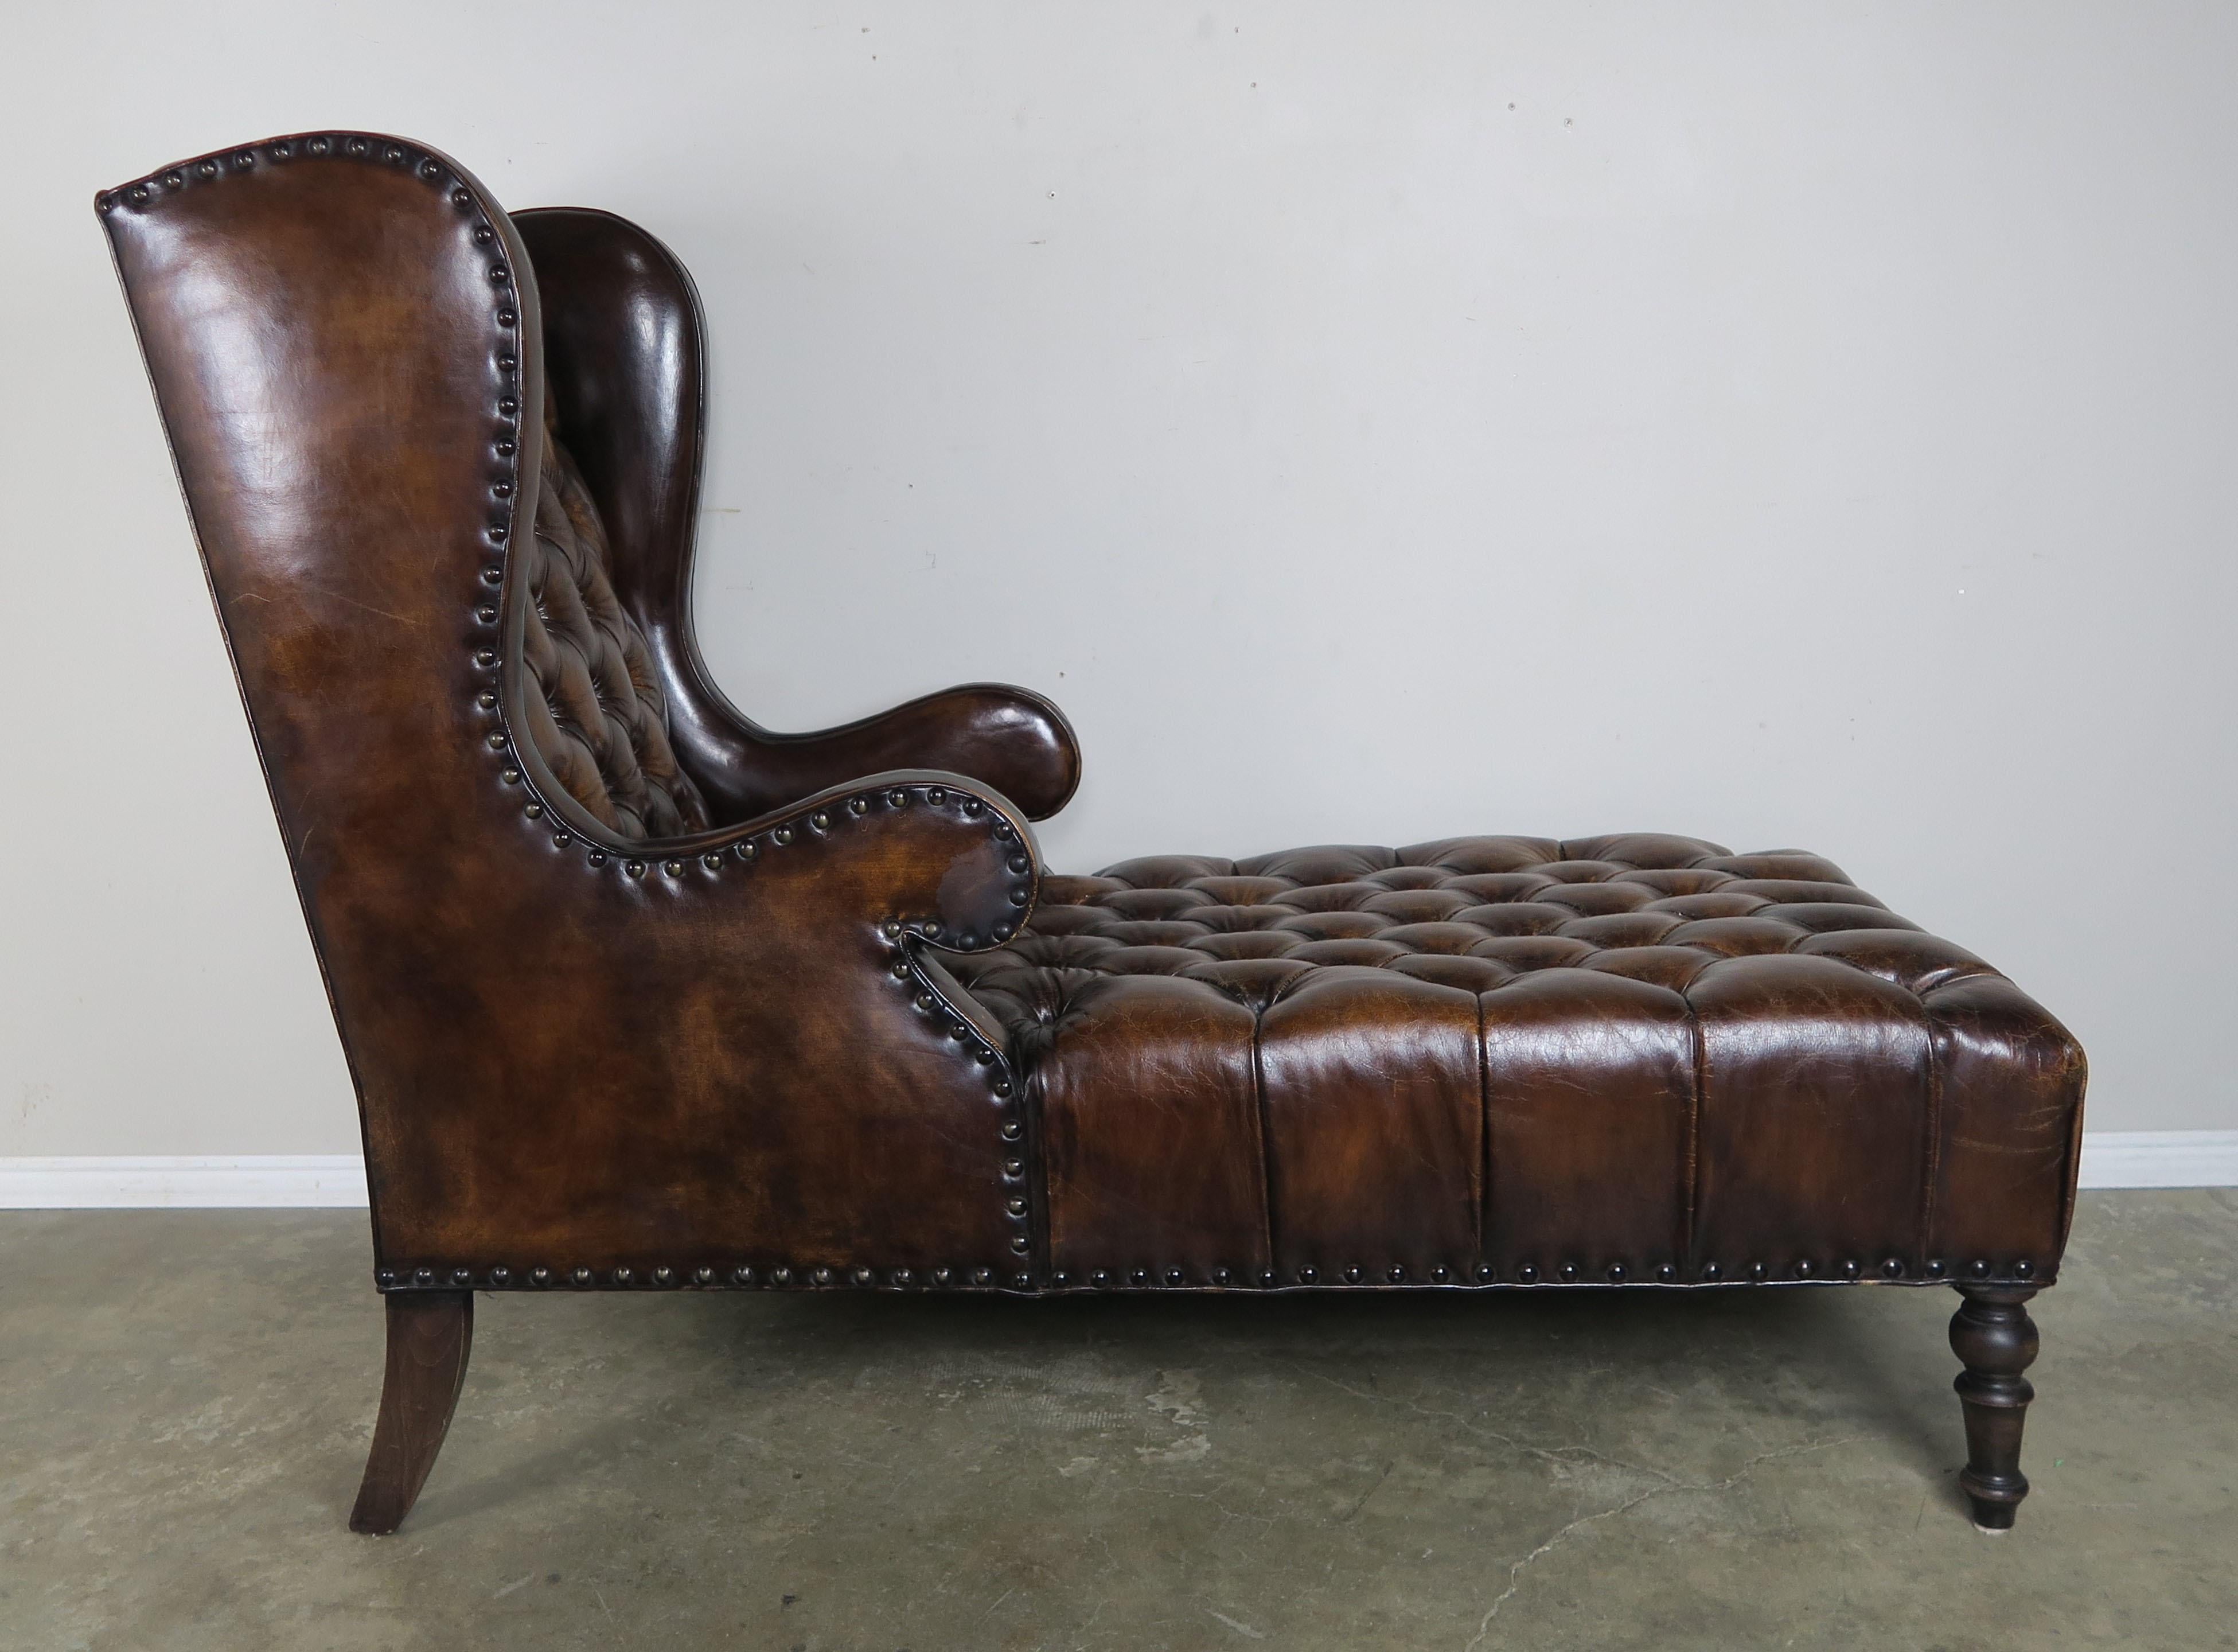 Leather tufted wingback chaise with nailhead trim detail. The chaise stands on four turned legs finished in a dark walnut coloration. Self cord and flat welt detail finished with large size antique brass nailhead trim detail.
Measures: SH 18